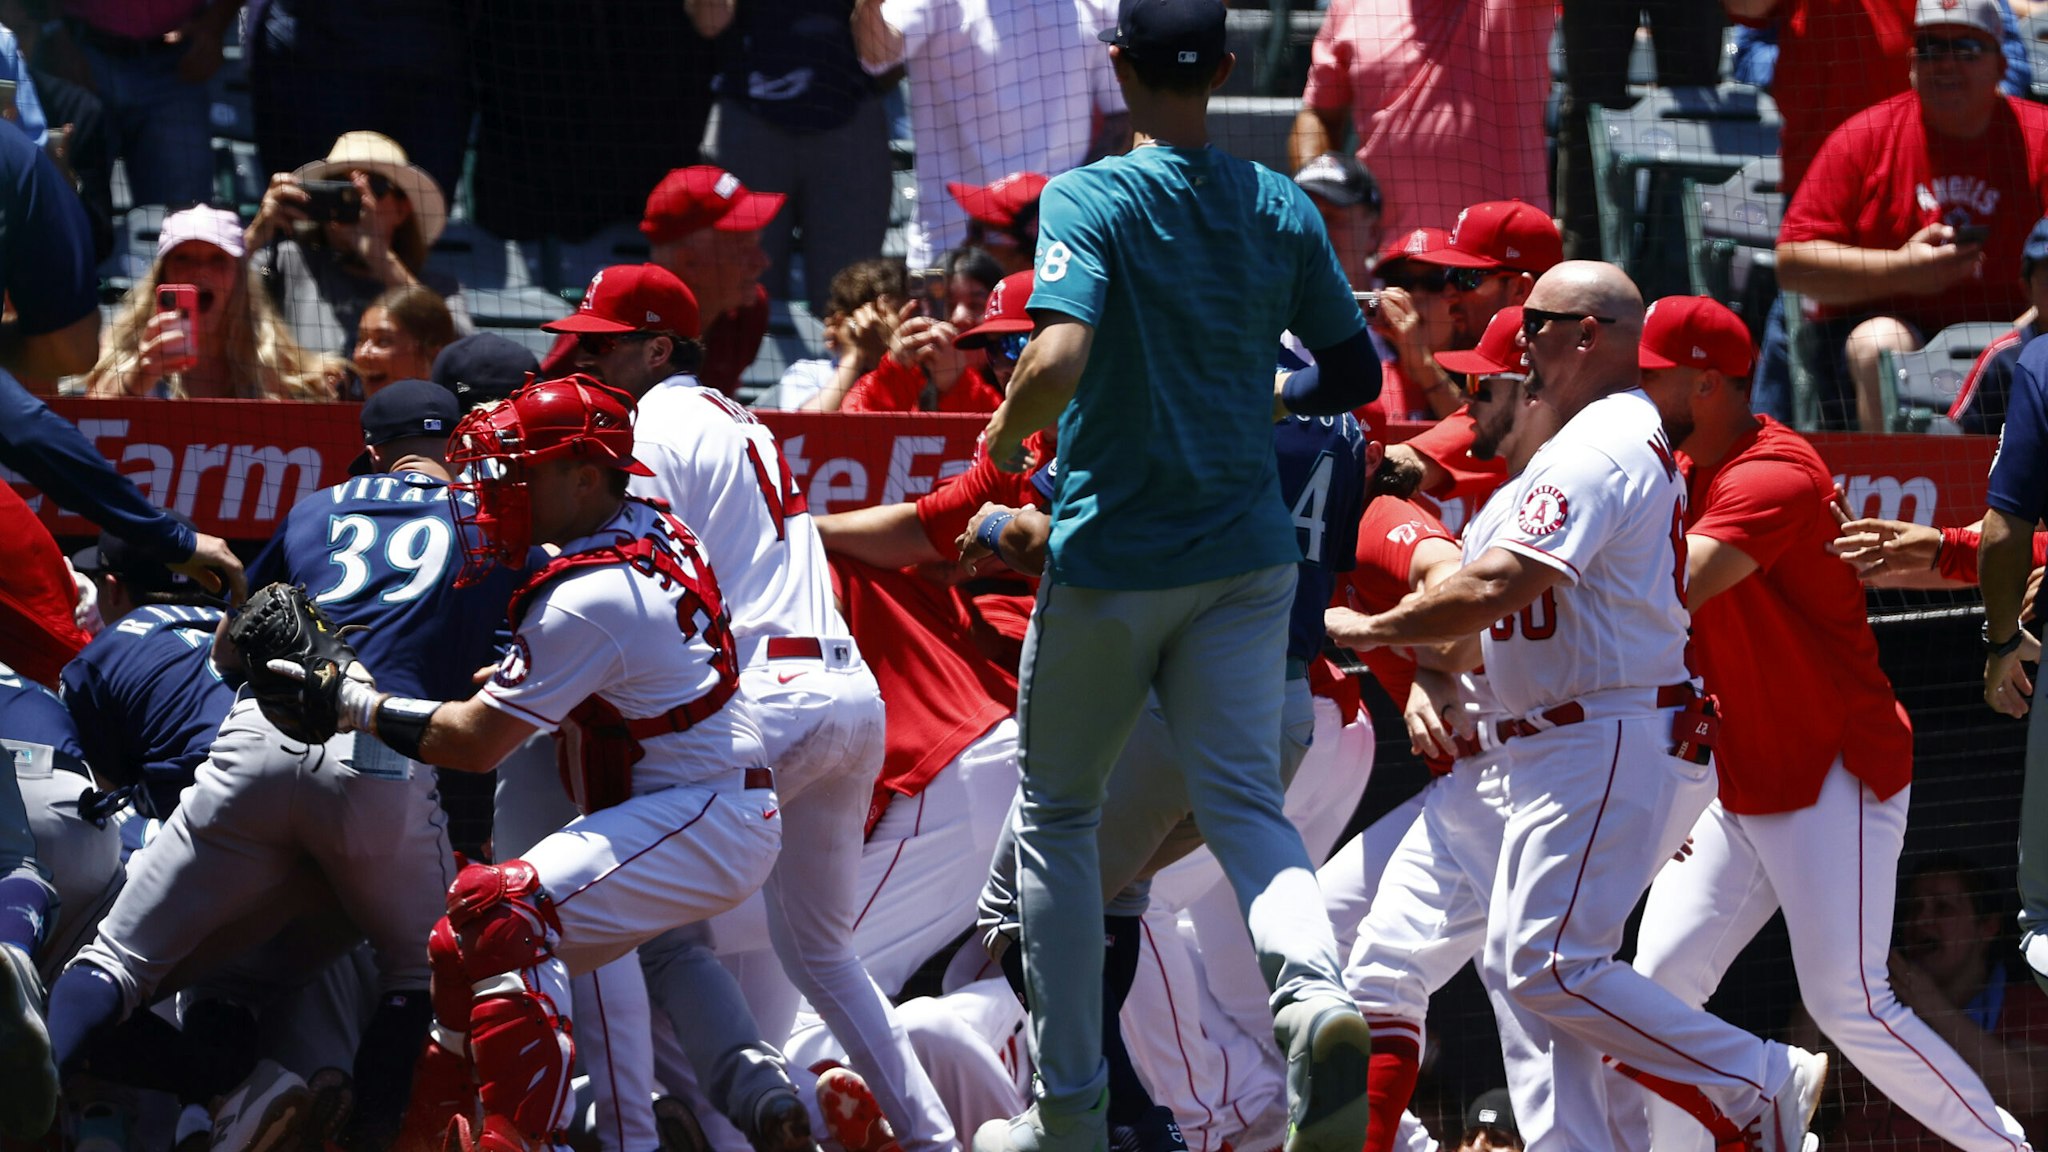 A Seattle Mariners fan ordered up a pizza for outfielder Jesse Winker after he was ejected following a brawl with the Los Angeles Angels